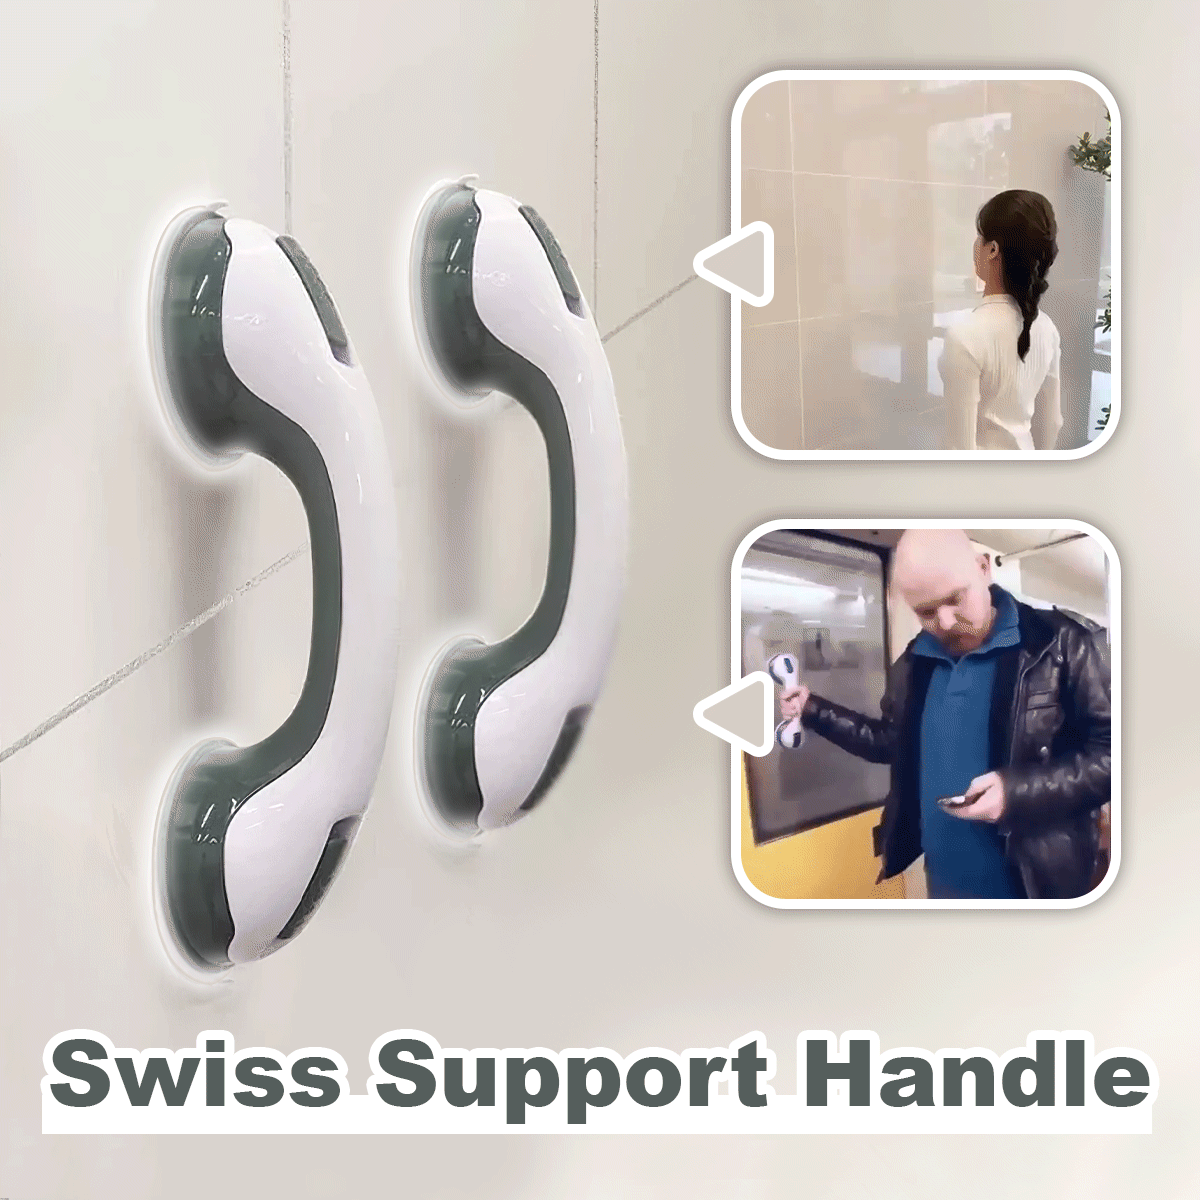 THIS IS A DISCOUNT FOR YOU - 2pcs Swiss Support Handle